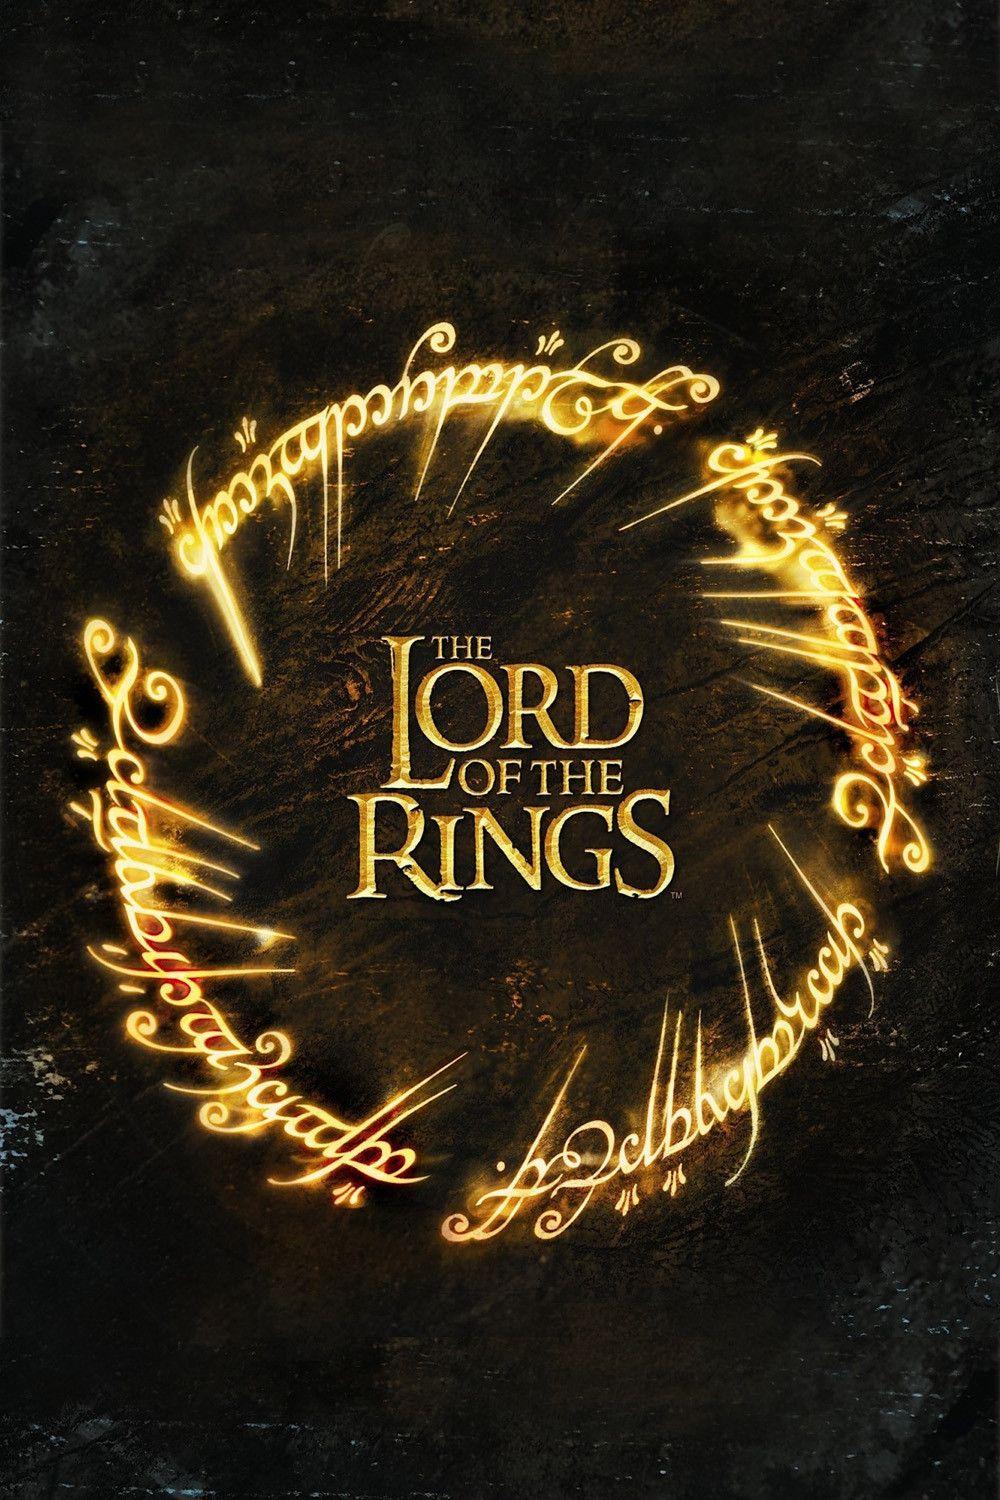 Lord of the Rings Logo - Collecting The Precious